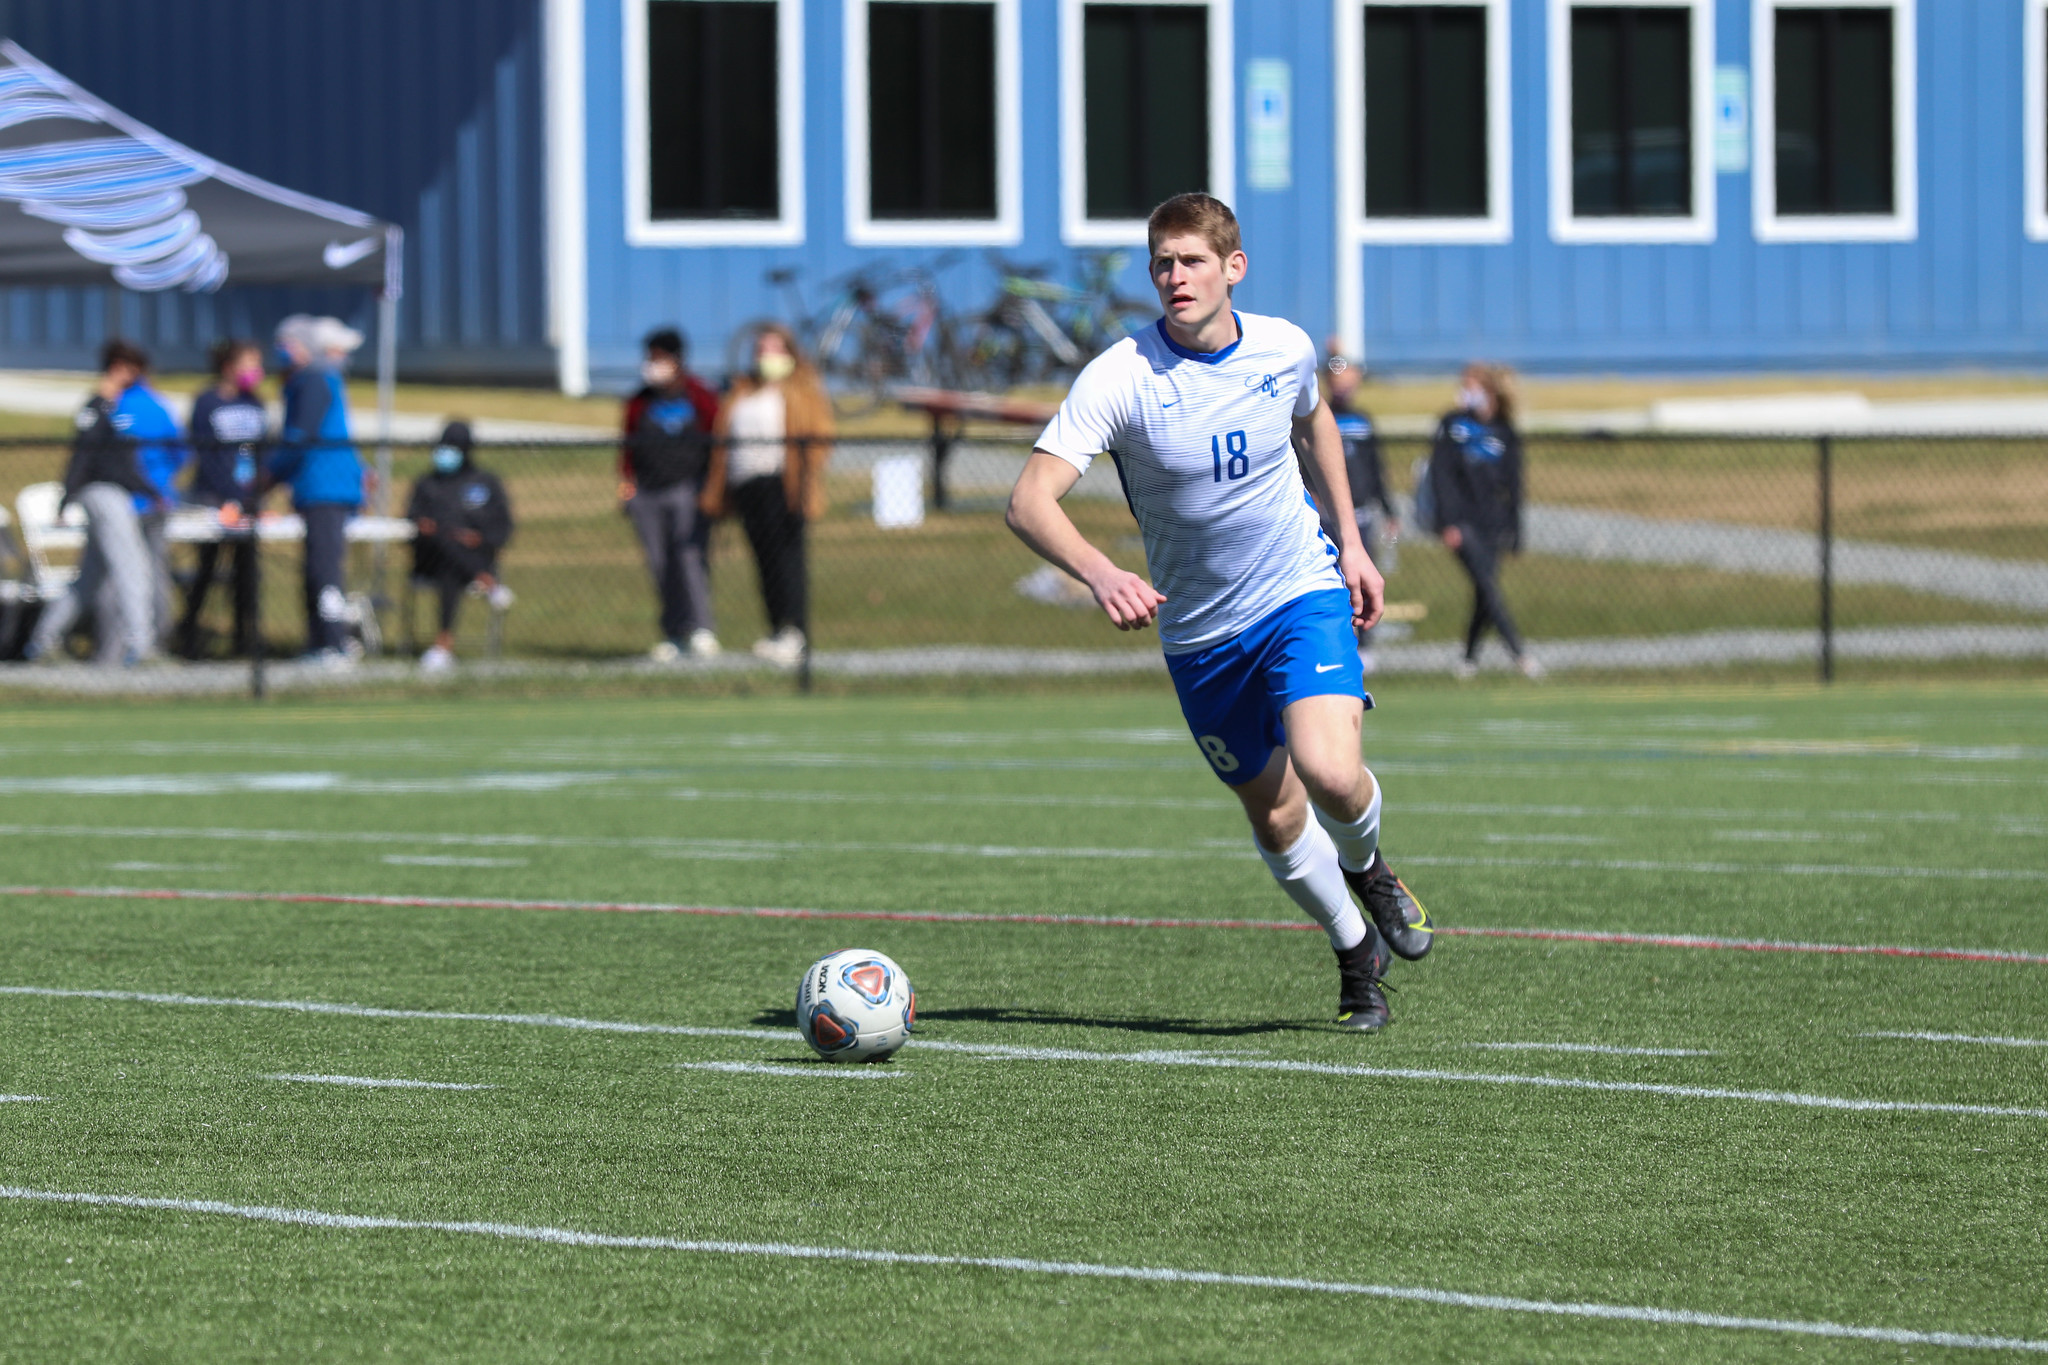 Sophomore Trystan Wallace scored the first goal of his collegiate career, an eventual game-winner, to help put the Tornados over the top in a 3-1 victory (Photo courtesy of Victoria Brayman '22).